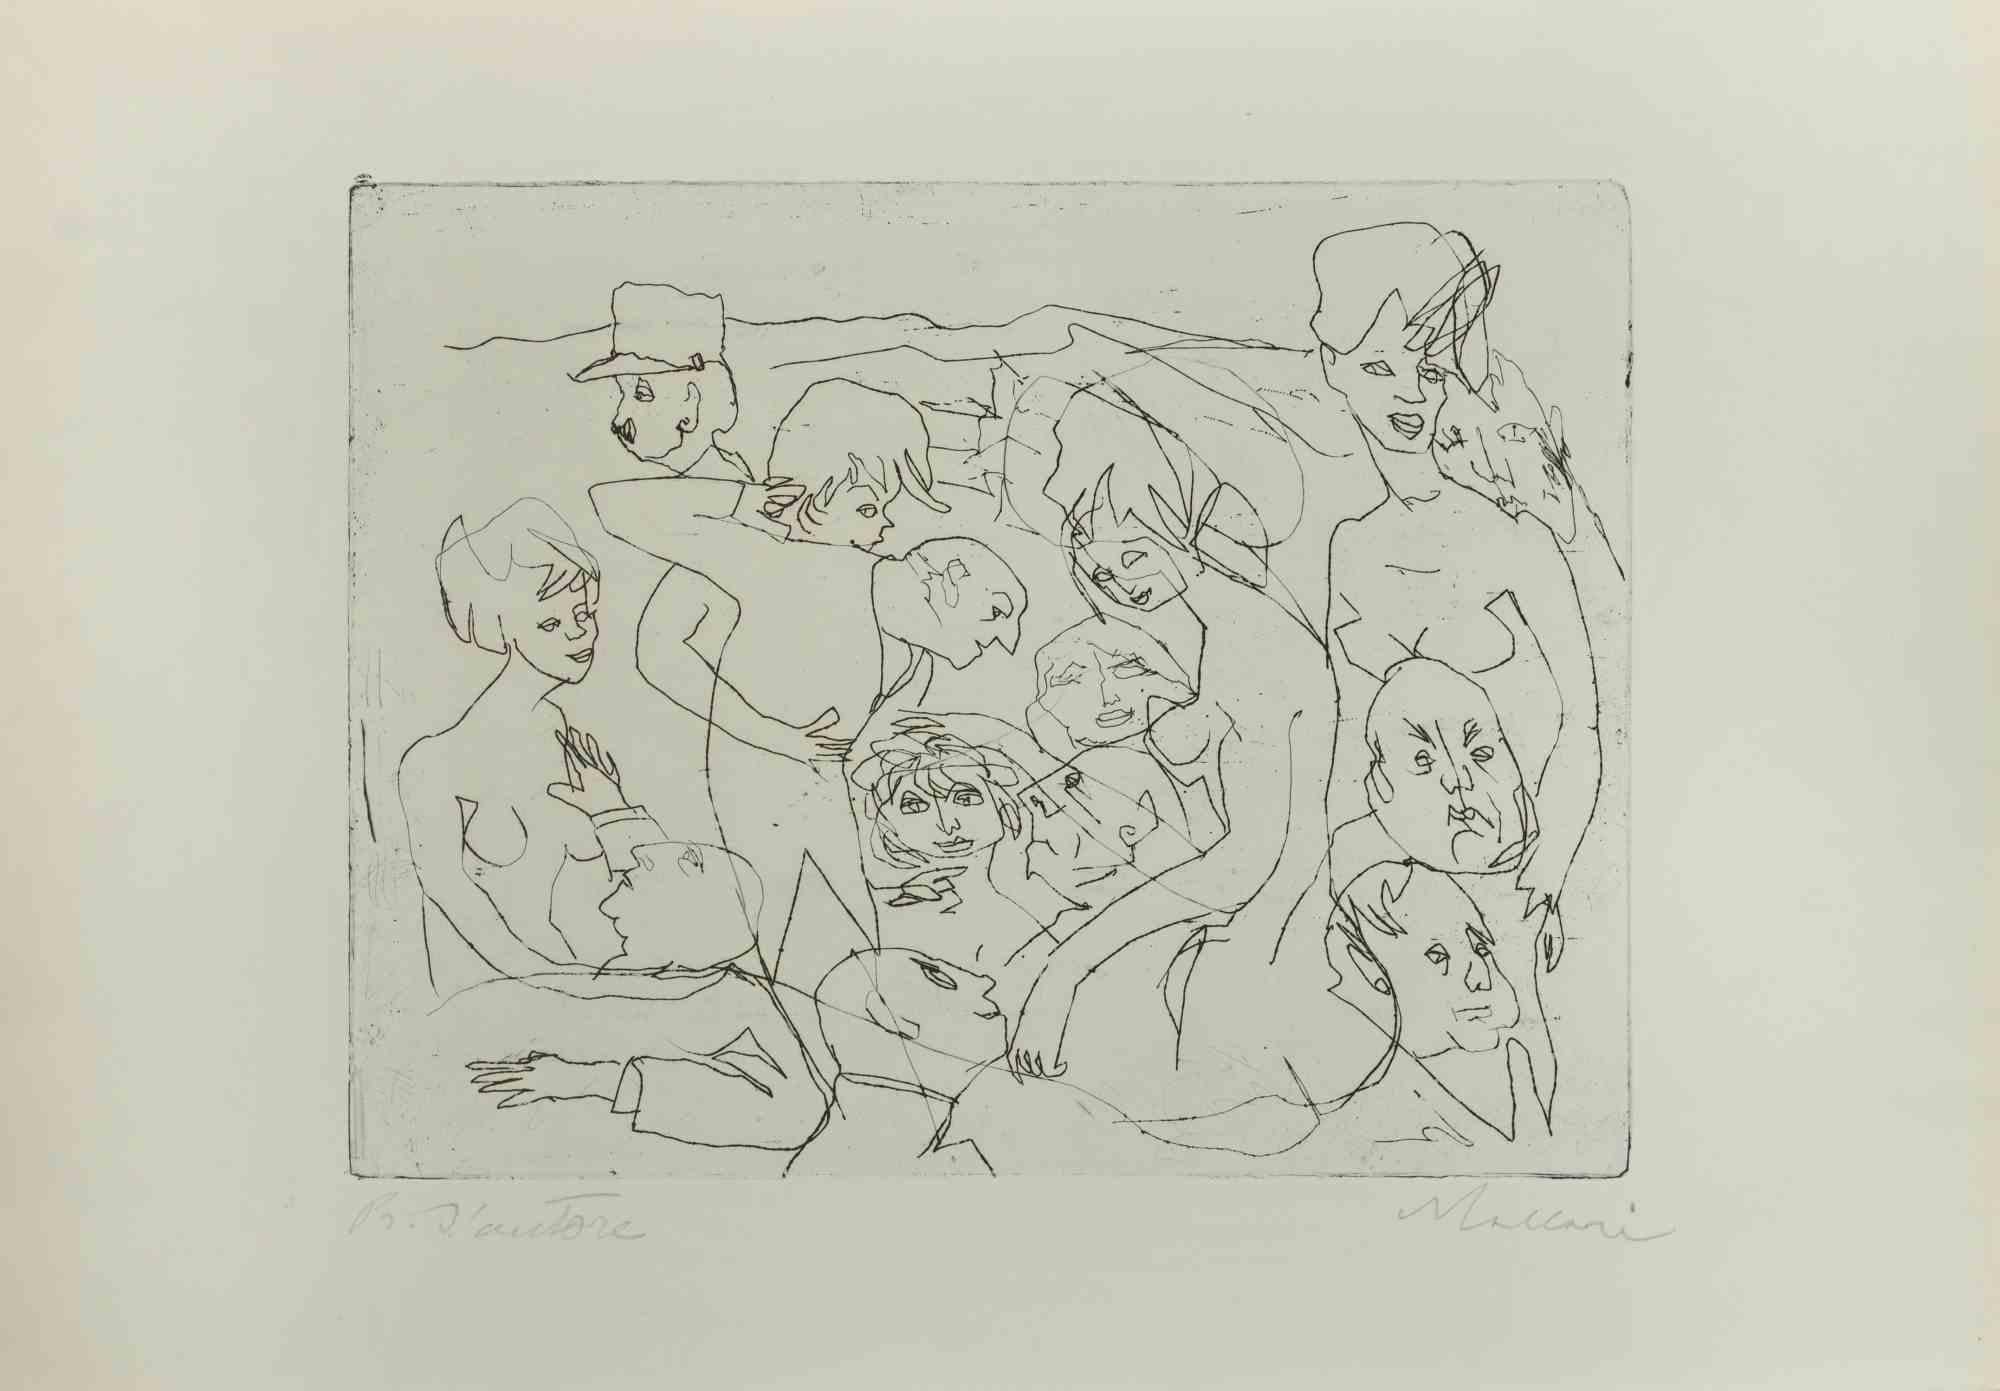 Figures - Etching by Mino Maccari - 1940s